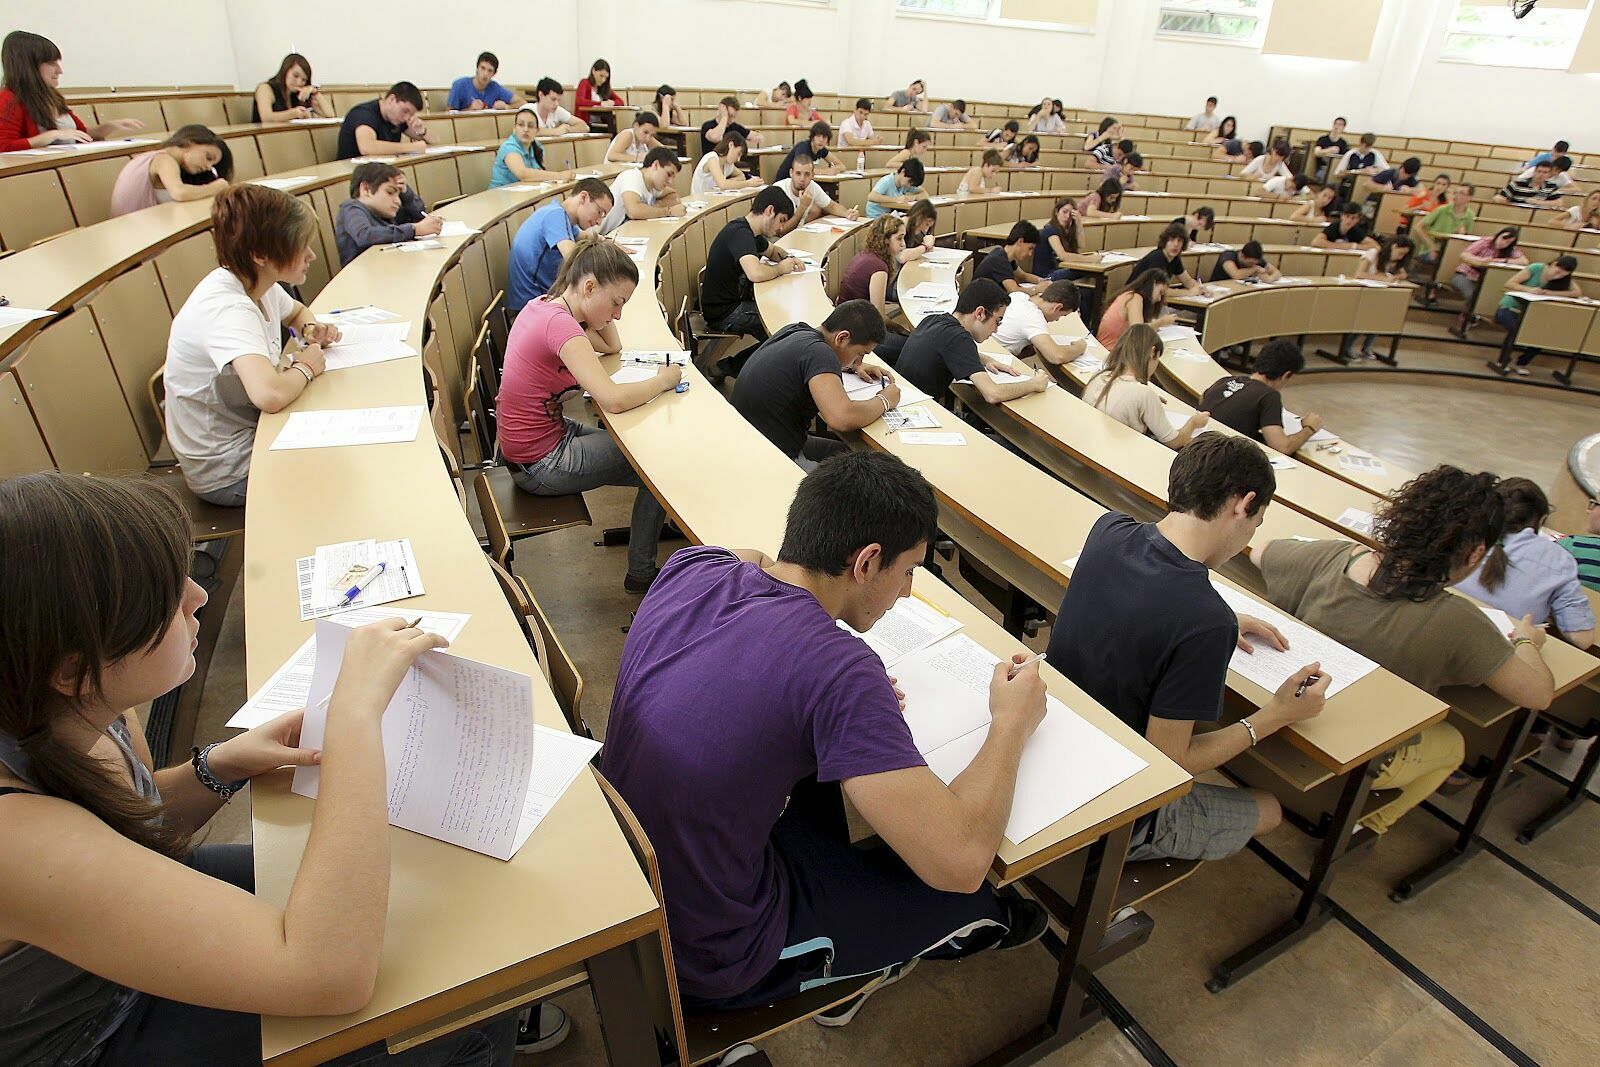 On February 8, Russian universities will return to full-time education